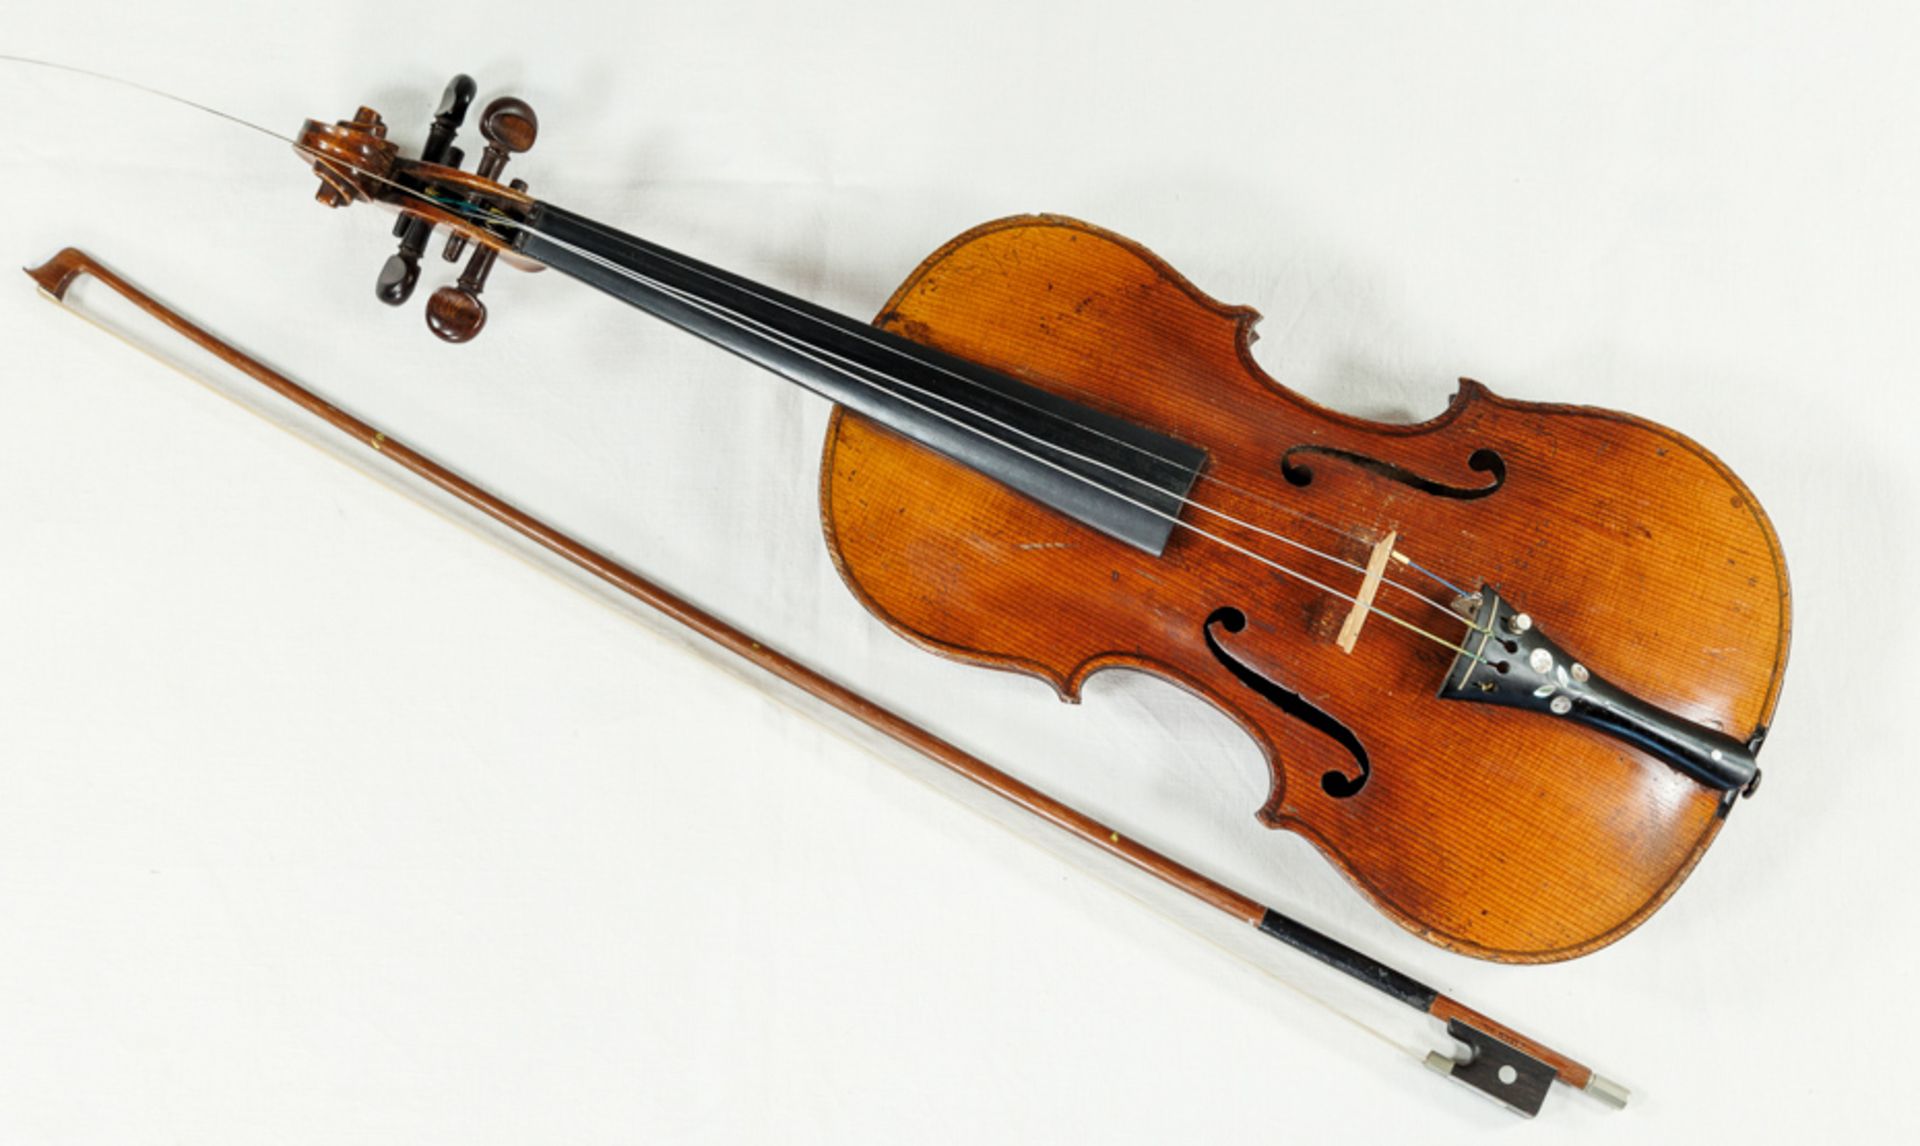 HISTORICAL ELEGANT VIOLIN WITH DECORATED BACK AND MATCHING CASE - Image 2 of 7